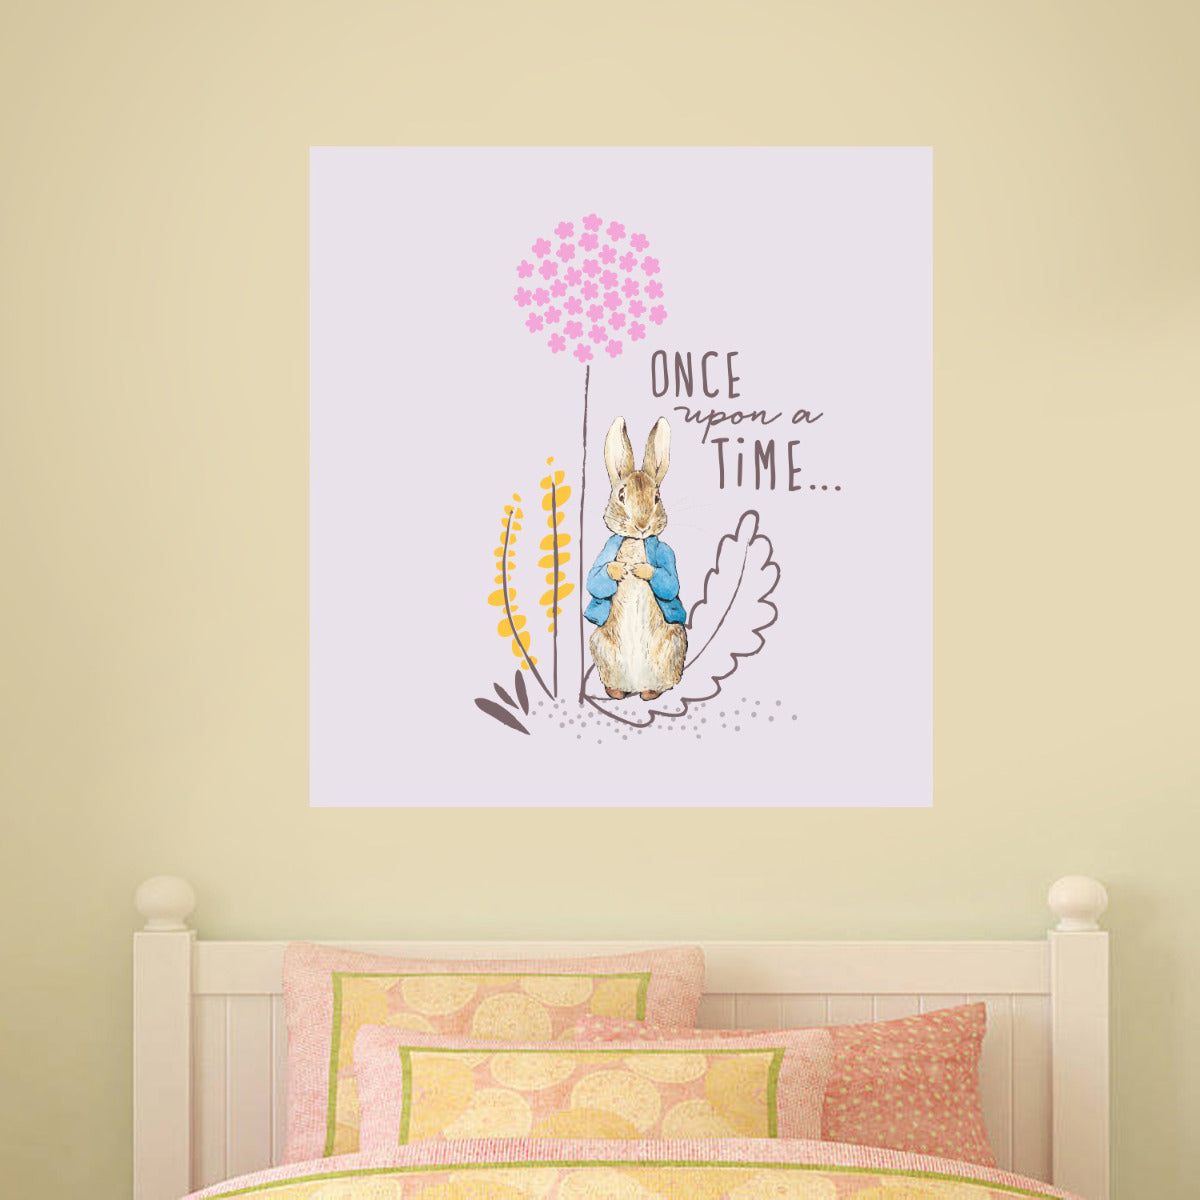 Peter Rabbit Dandelion Once Upon A Time Wall Sticker